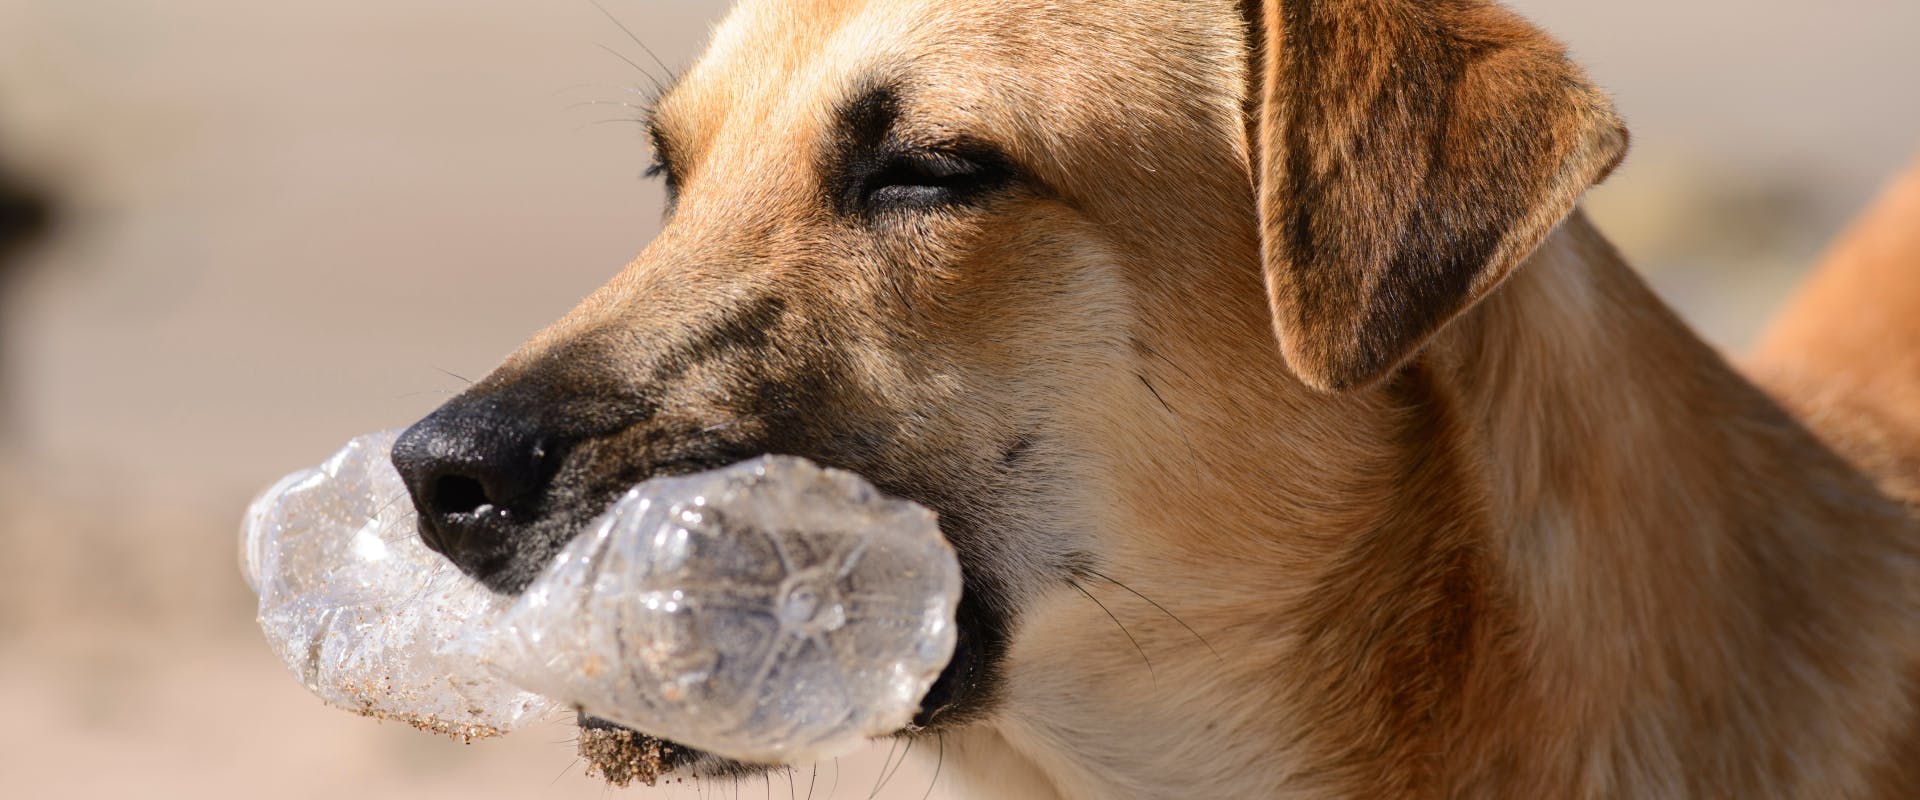 A dog holds a plastic bottle in its mouth.